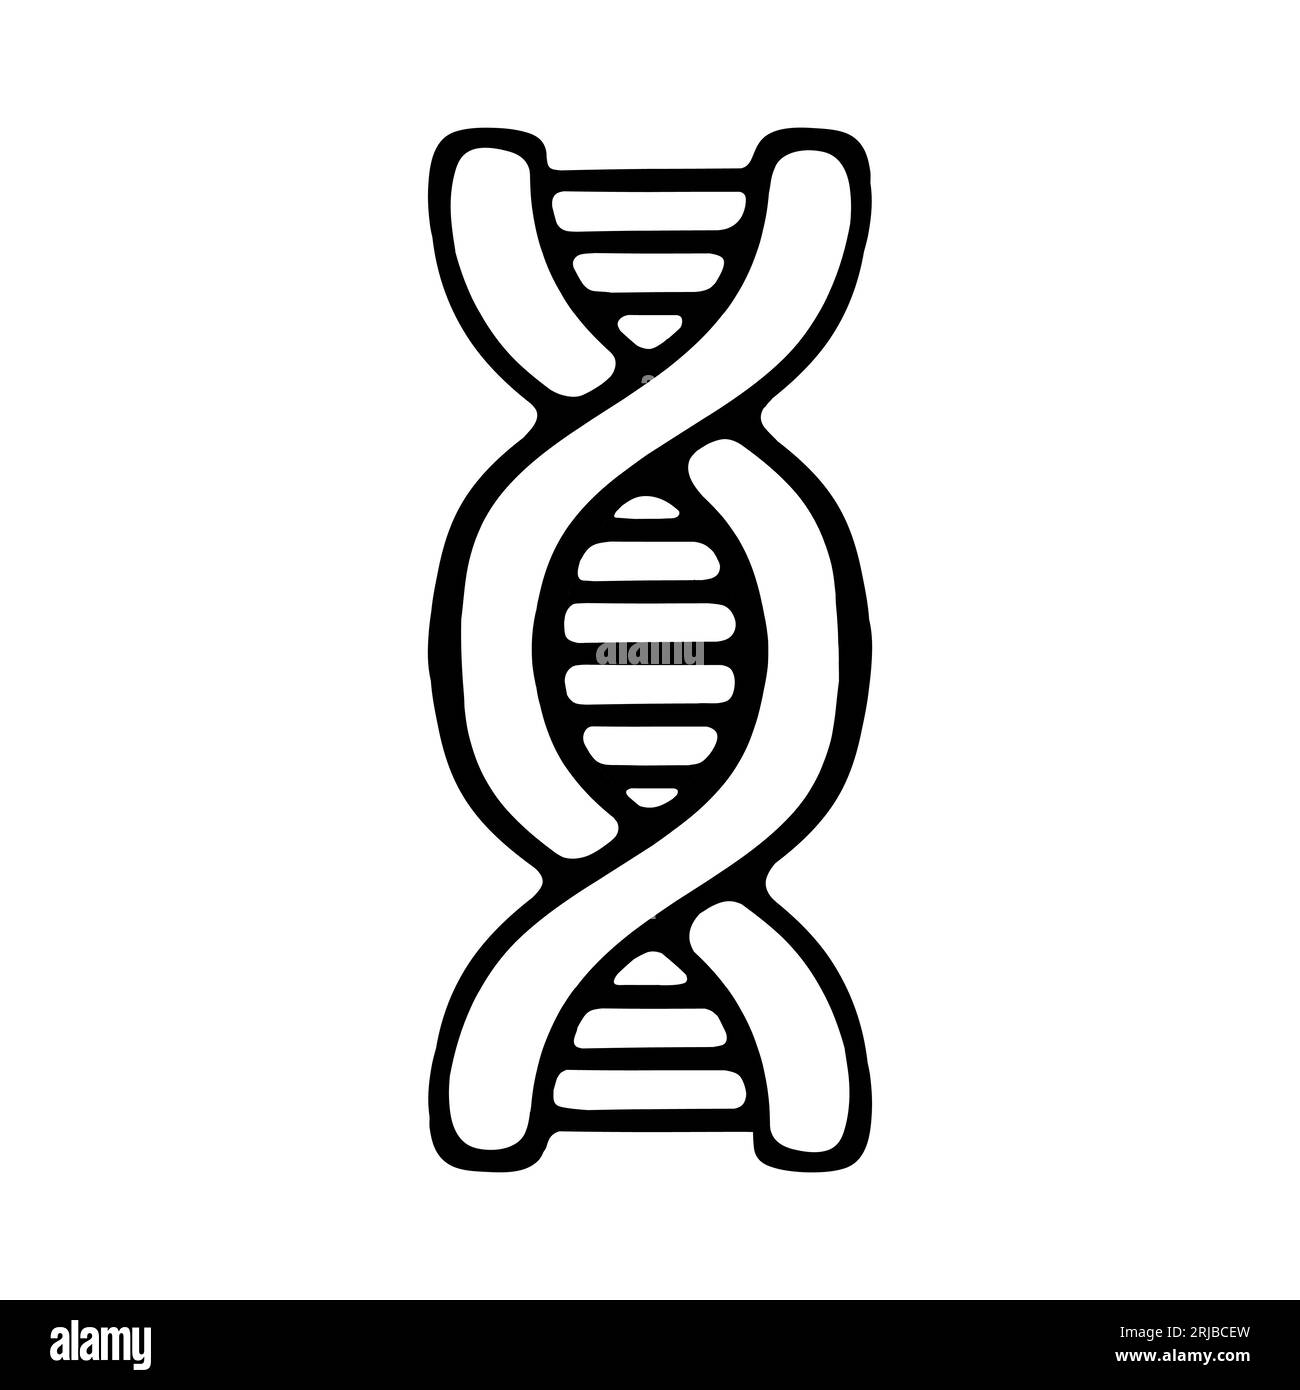 Dna line icon. Chromosomes, RNA, heredity, genome, cell, biology. Vector black line icon on white background for Business Stock Vector